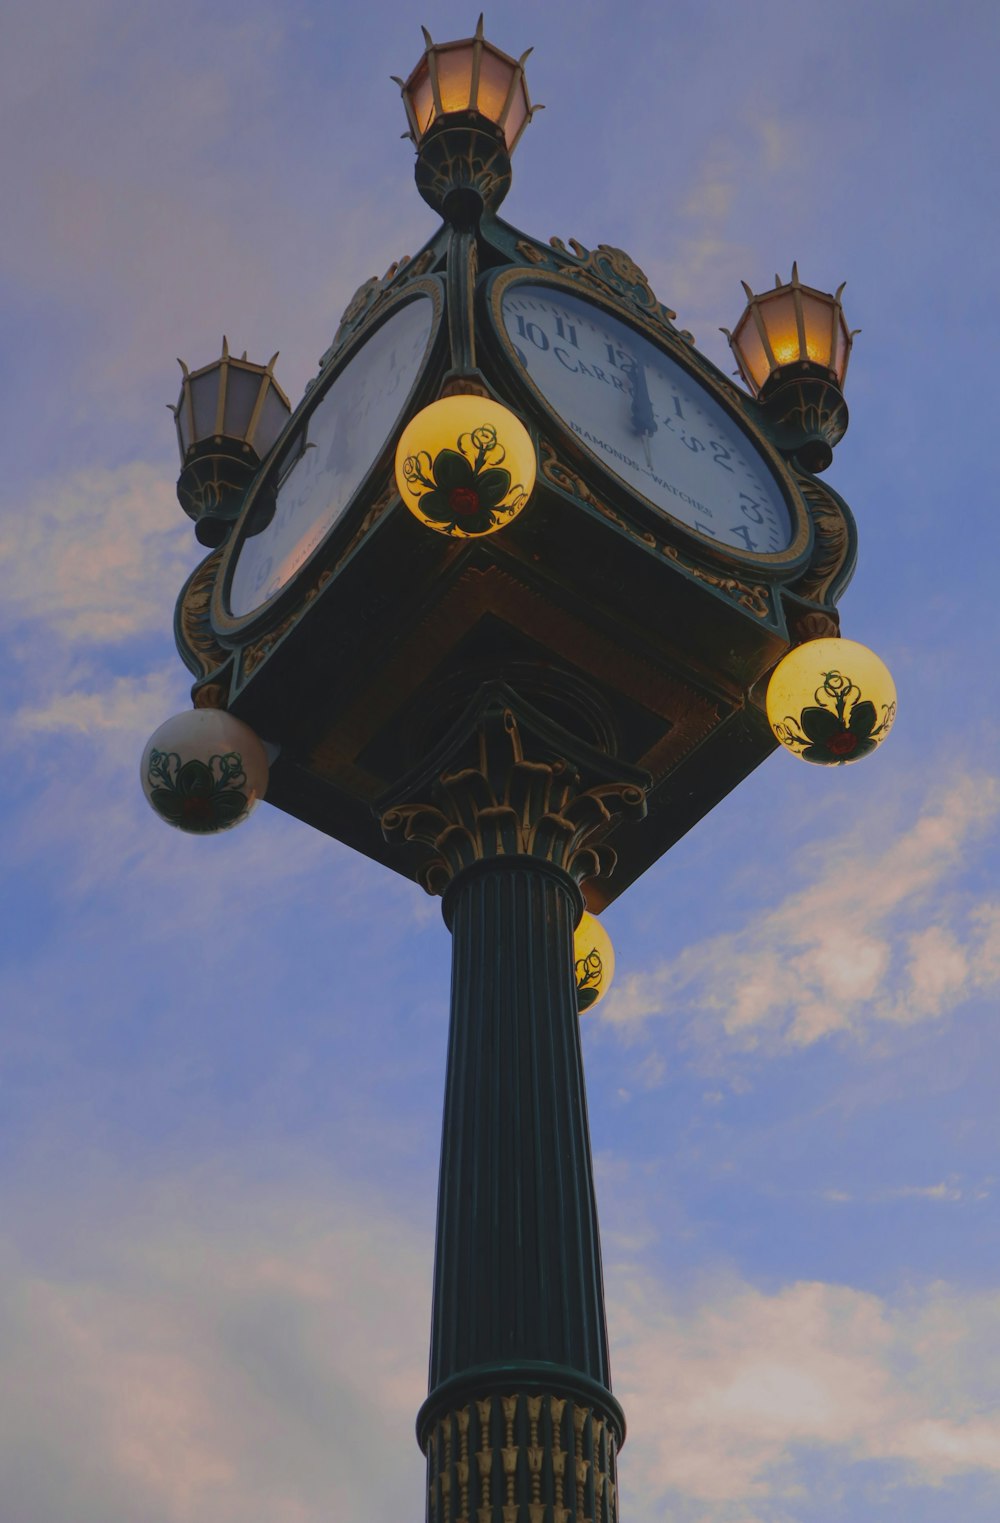 a clock on a pole with a sky in the background